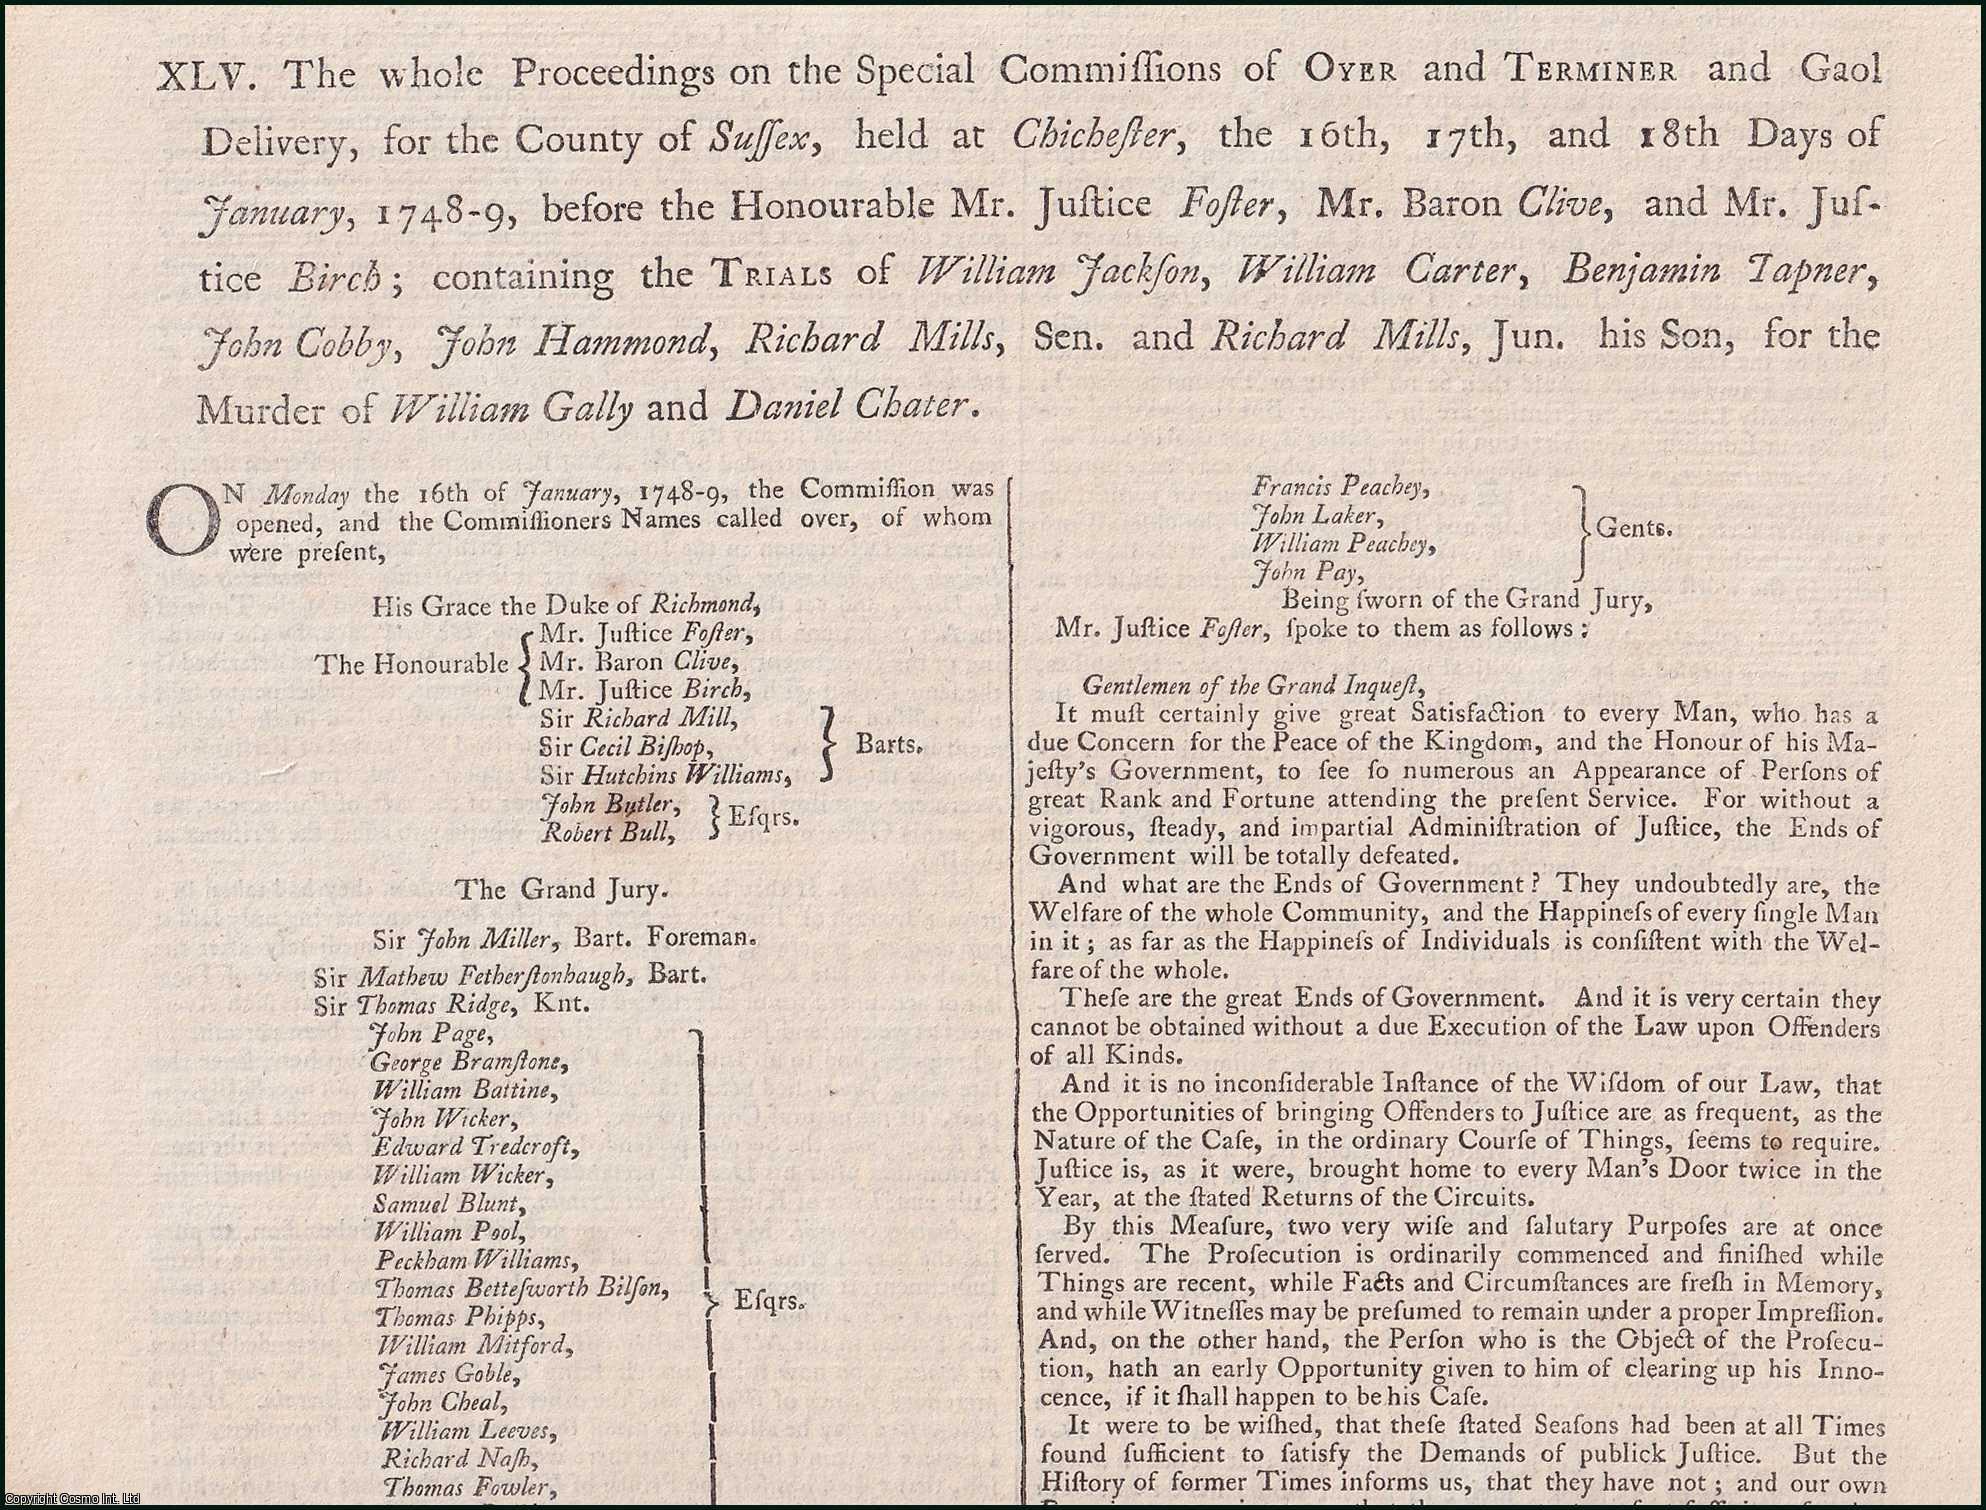 [Trial]. - The whole Proceedings on the Special Commissions of Oyer and Terminer and Gaol Delivery, for the County of Sussex, held at Chichester, the 16th, 17th, and 18th Days of January, 1748-9, before the Honourable Mr. Justice Foster, Mr. Baron Clive, and Mr. Justice Birch ; containing the Trials of William Jackson, William Carter, Benjamin Tapner, John Cobby, John Hammond, Richard Mills, Sen. and Richard Mills, Jun. his Son, for the Murder of William Gally and Daniel Chater, 1748-9. An original report from the Collected State Trials.